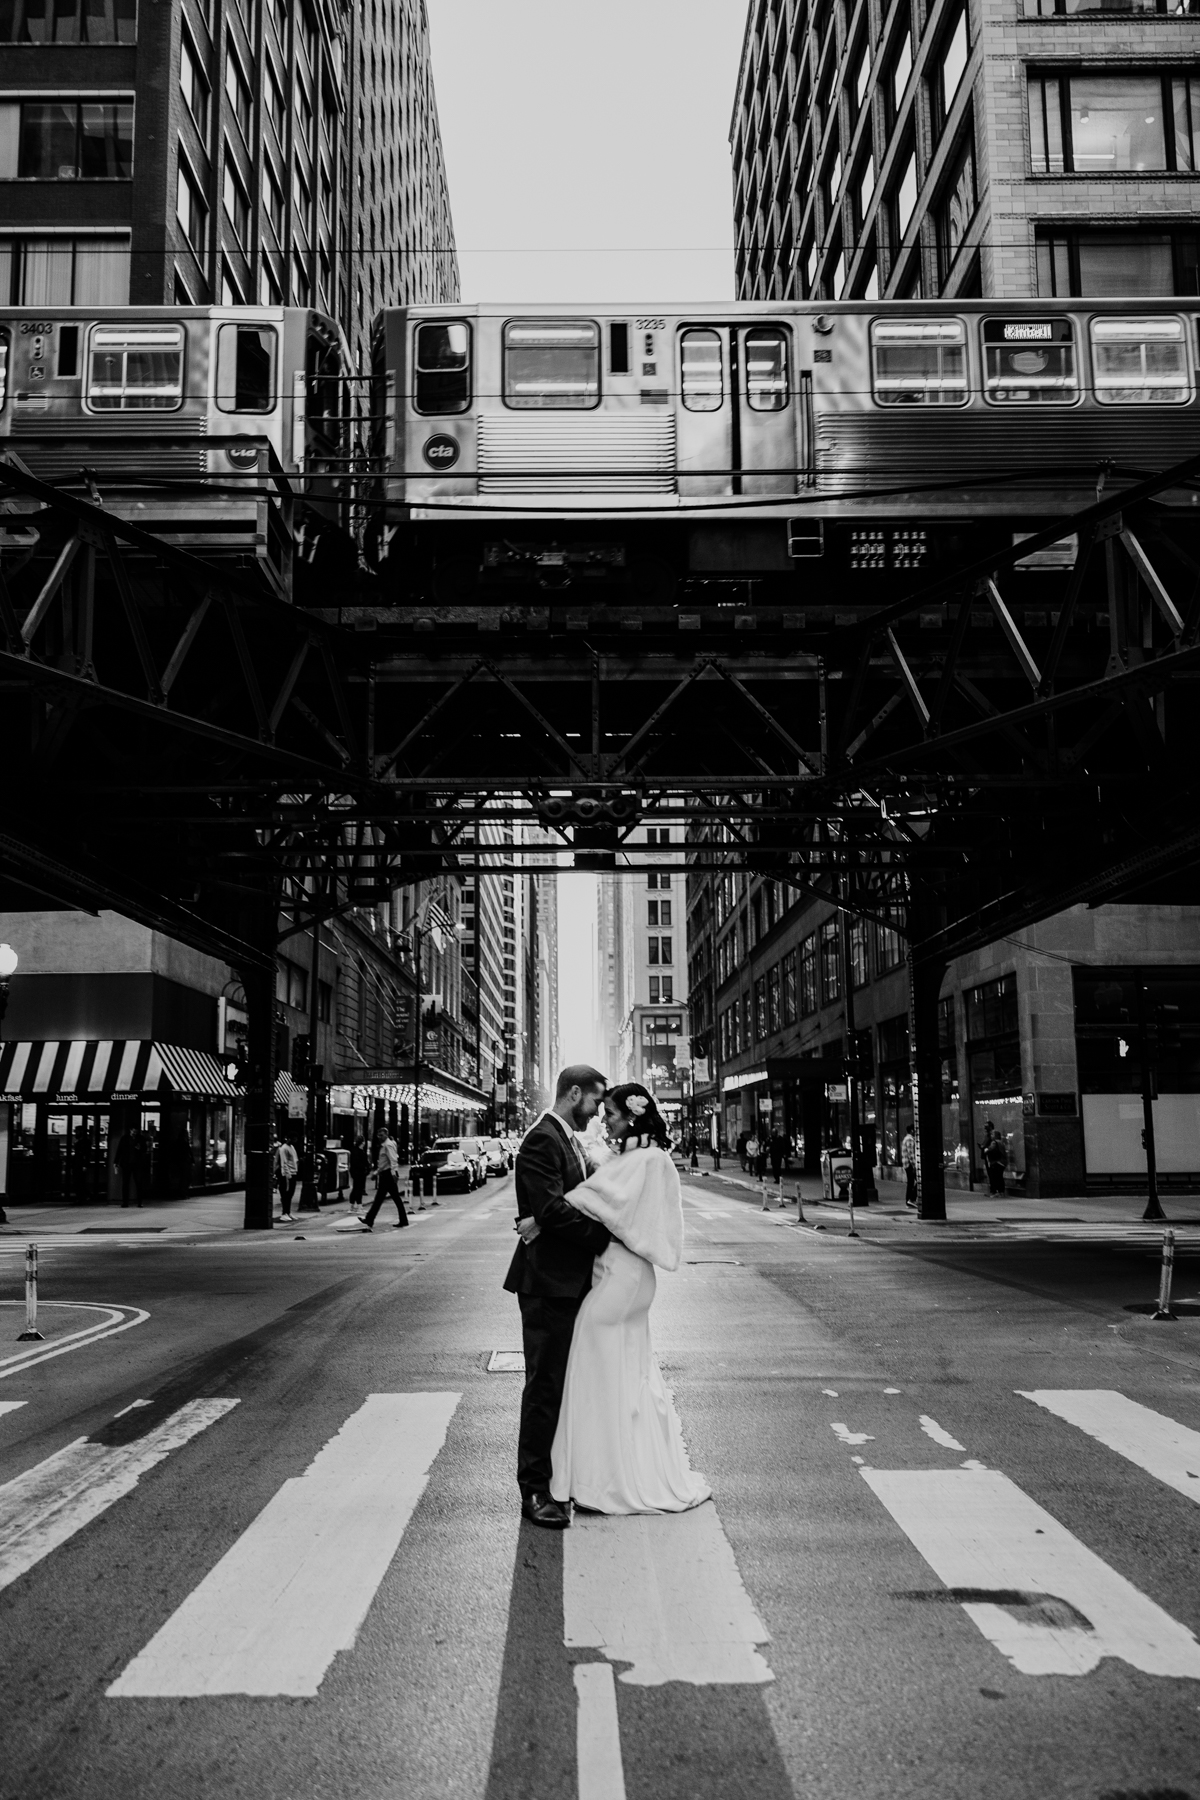 Black and white wedding photo of bride and groom in Chicago street with sunset and train going by